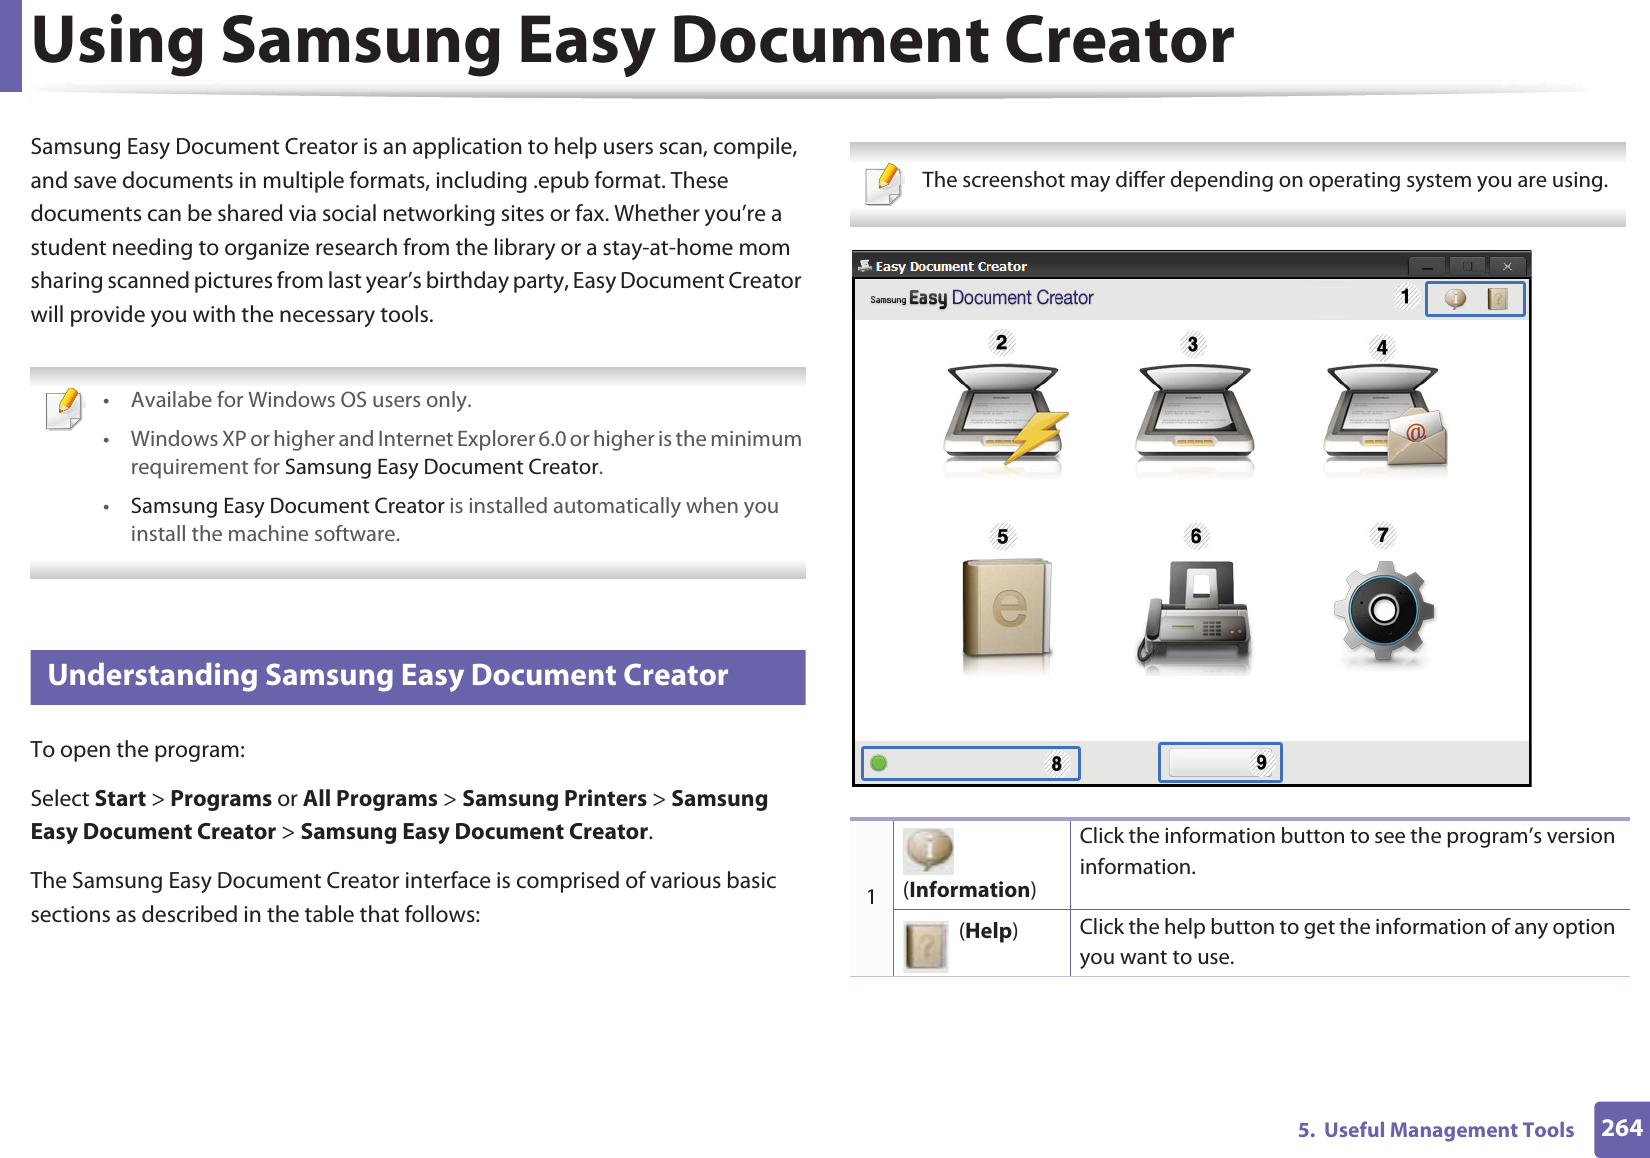 2645.  Useful Management ToolsUsing Samsung Easy Document CreatorSamsung Easy Document Creator is an application to help users scan, compile, and save documents in multiple formats, including .epub format. These documents can be shared via social networking sites or fax. Whether you’re a student needing to organize research from the library or a stay-at-home mom sharing scanned pictures from last year’s birthday party, Easy Document Creator will provide you with the necessary tools. • Availabe for Windows OS users only.• Windows XP or higher and Internet Explorer 6.0 or higher is the minimum requirement for Samsung Easy Document Creator.•Samsung Easy Document Creator is installed automatically when you install the machine software.  6 Understanding Samsung Easy Document CreatorTo open the program: Select Start &gt; Programs or All Programs &gt; Samsung Printers &gt; Samsung Easy Document Creator &gt; Samsung Easy Document Creator.The Samsung Easy Document Creator interface is comprised of various basic sections as described in the table that follows: The screenshot may differ depending on operating system you are using. 1 (Information)Click the information button to see the program’s version information.  (Help)Click the help button to get the information of any option you want to use.